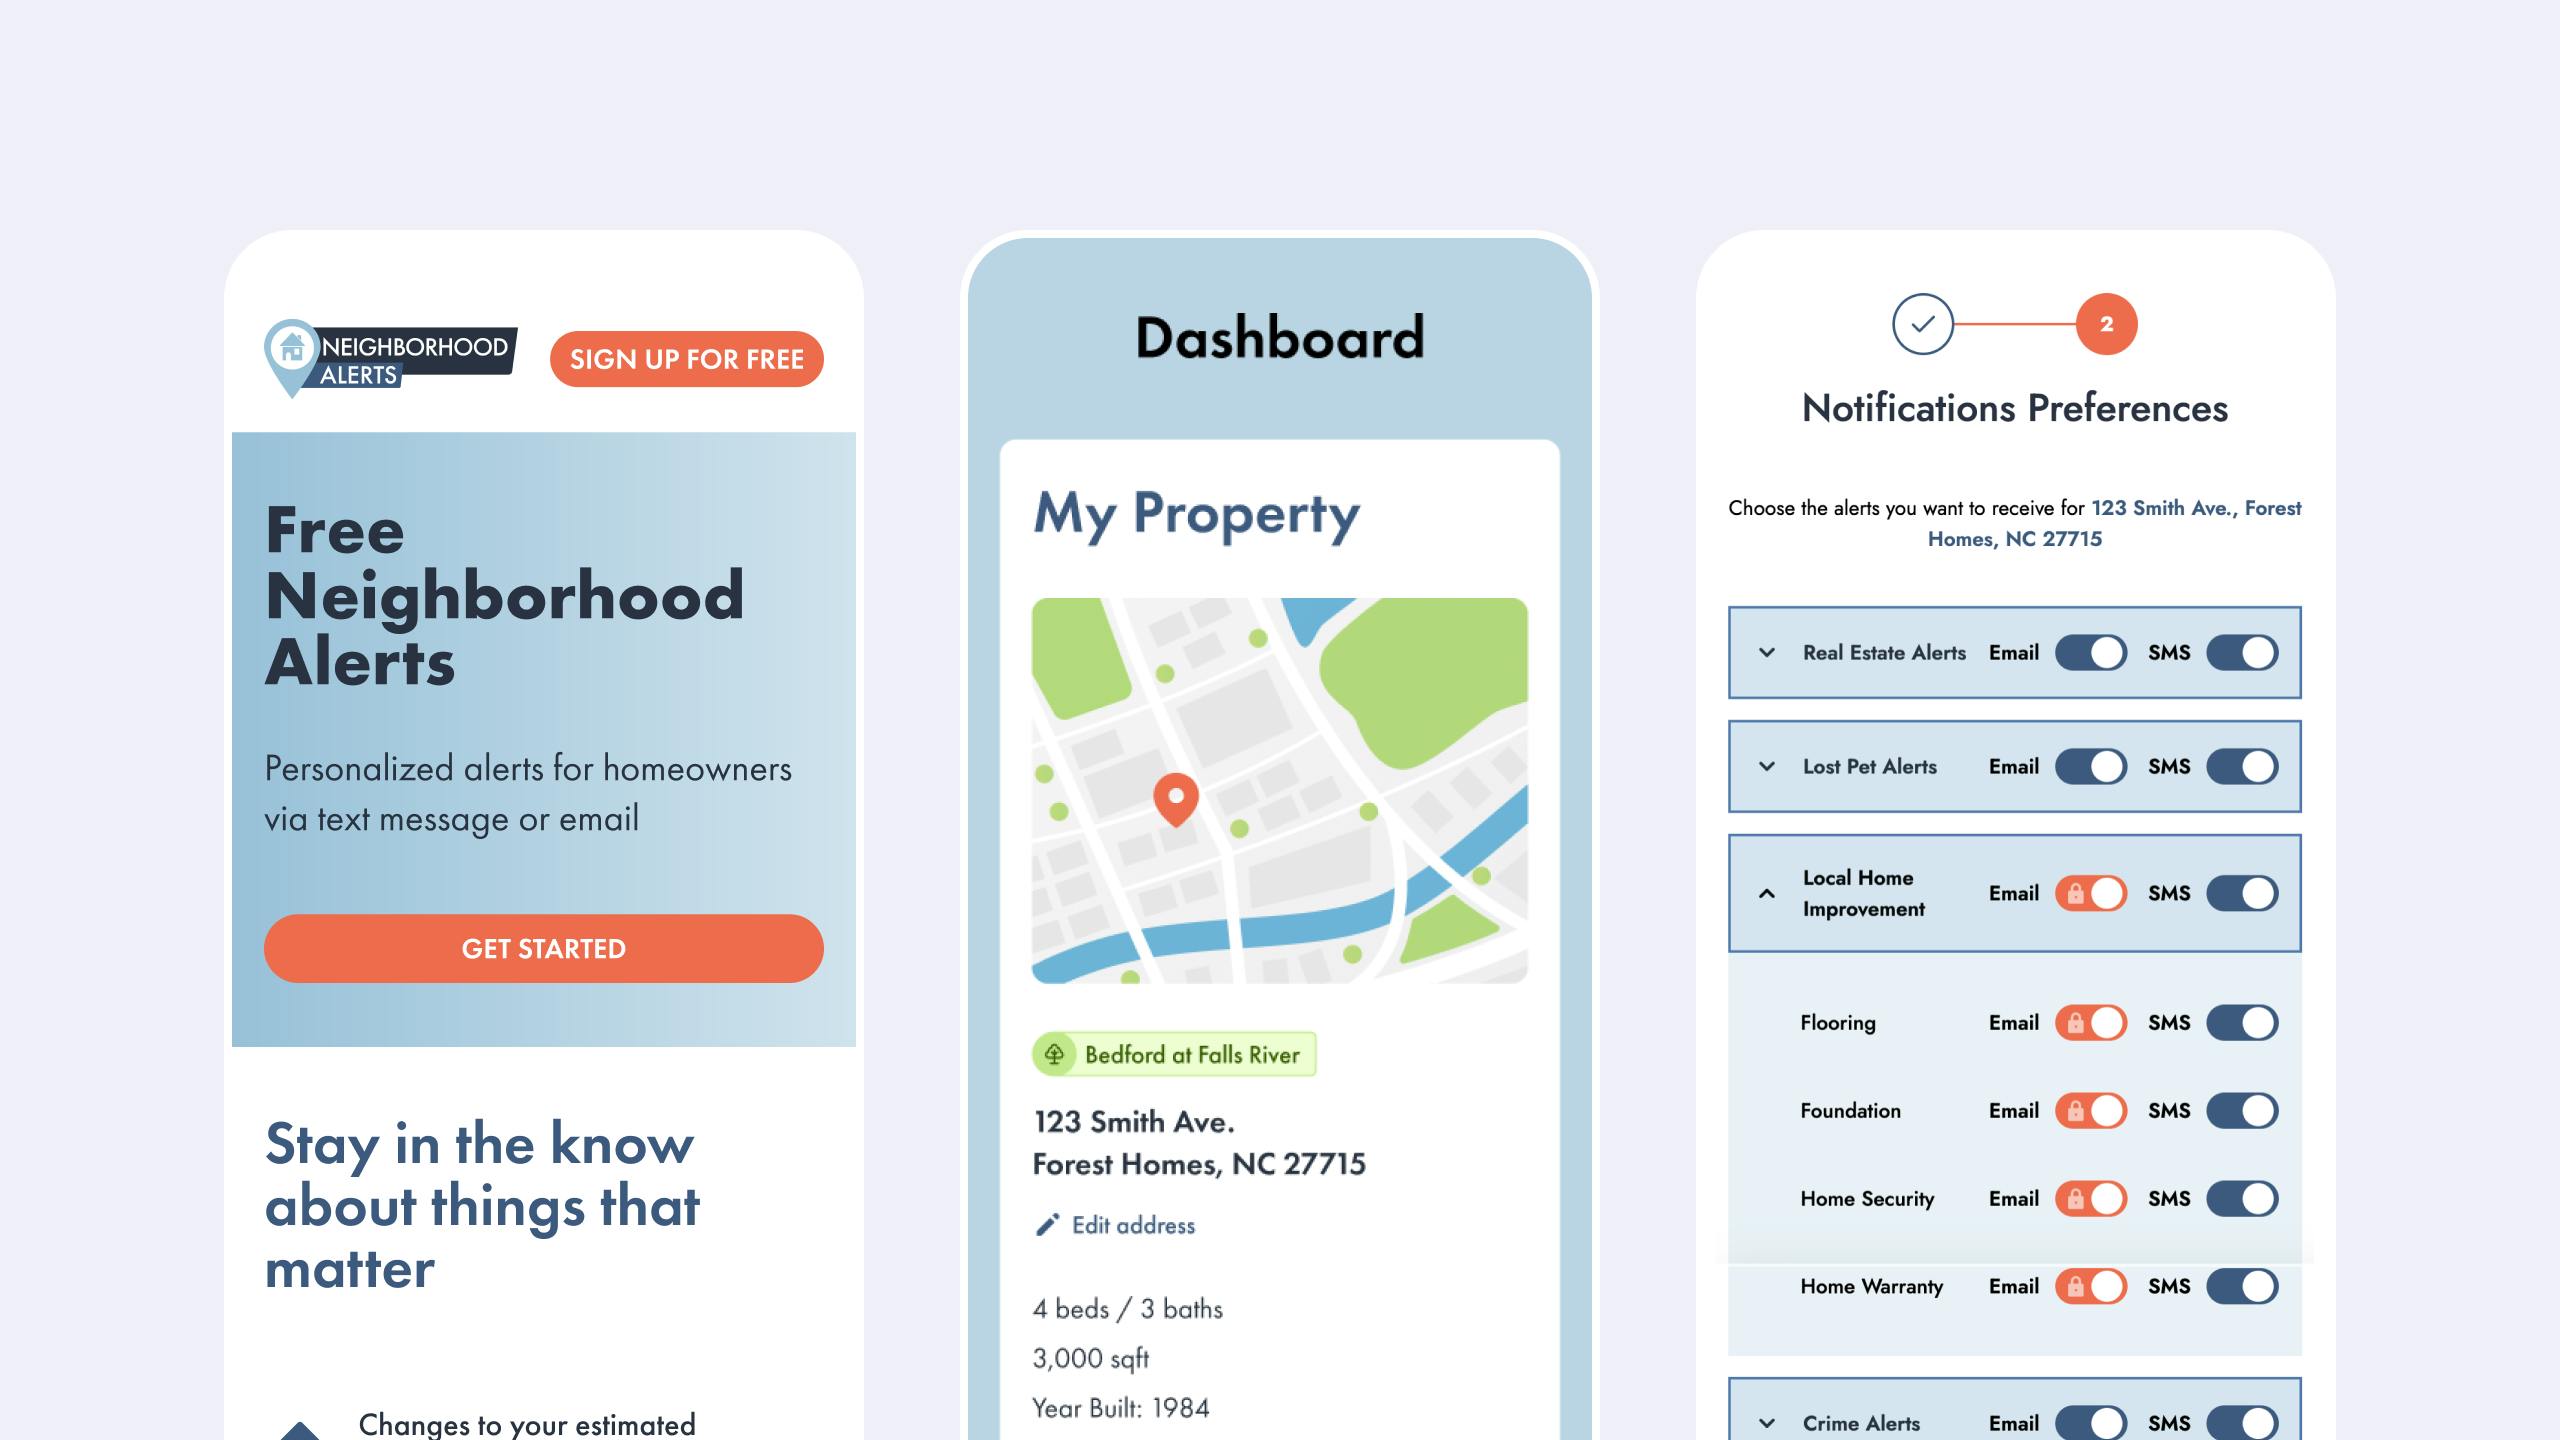 Three screenshots of the Neighborhood Alerts product. Shows the website homepage, a dashboard, and notification preferences.